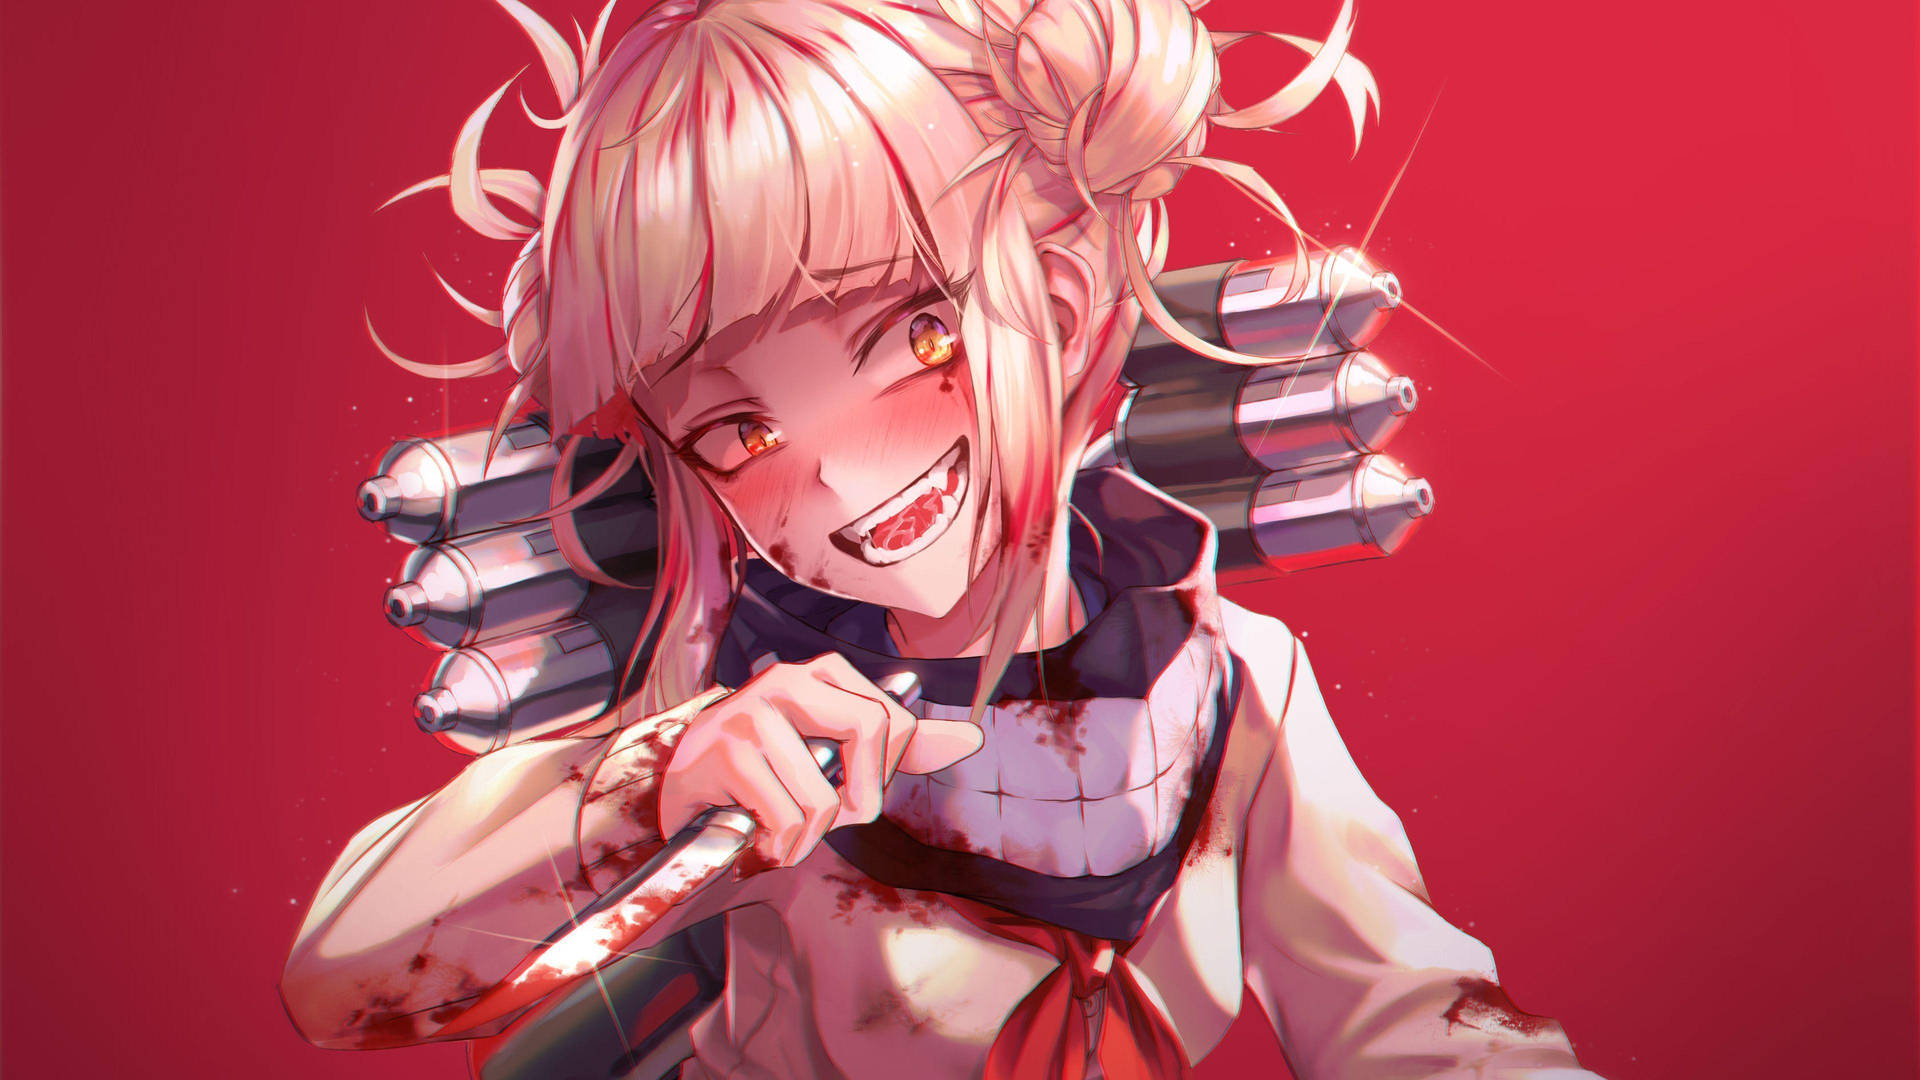 Himiko Toga Bloody Red Art Background